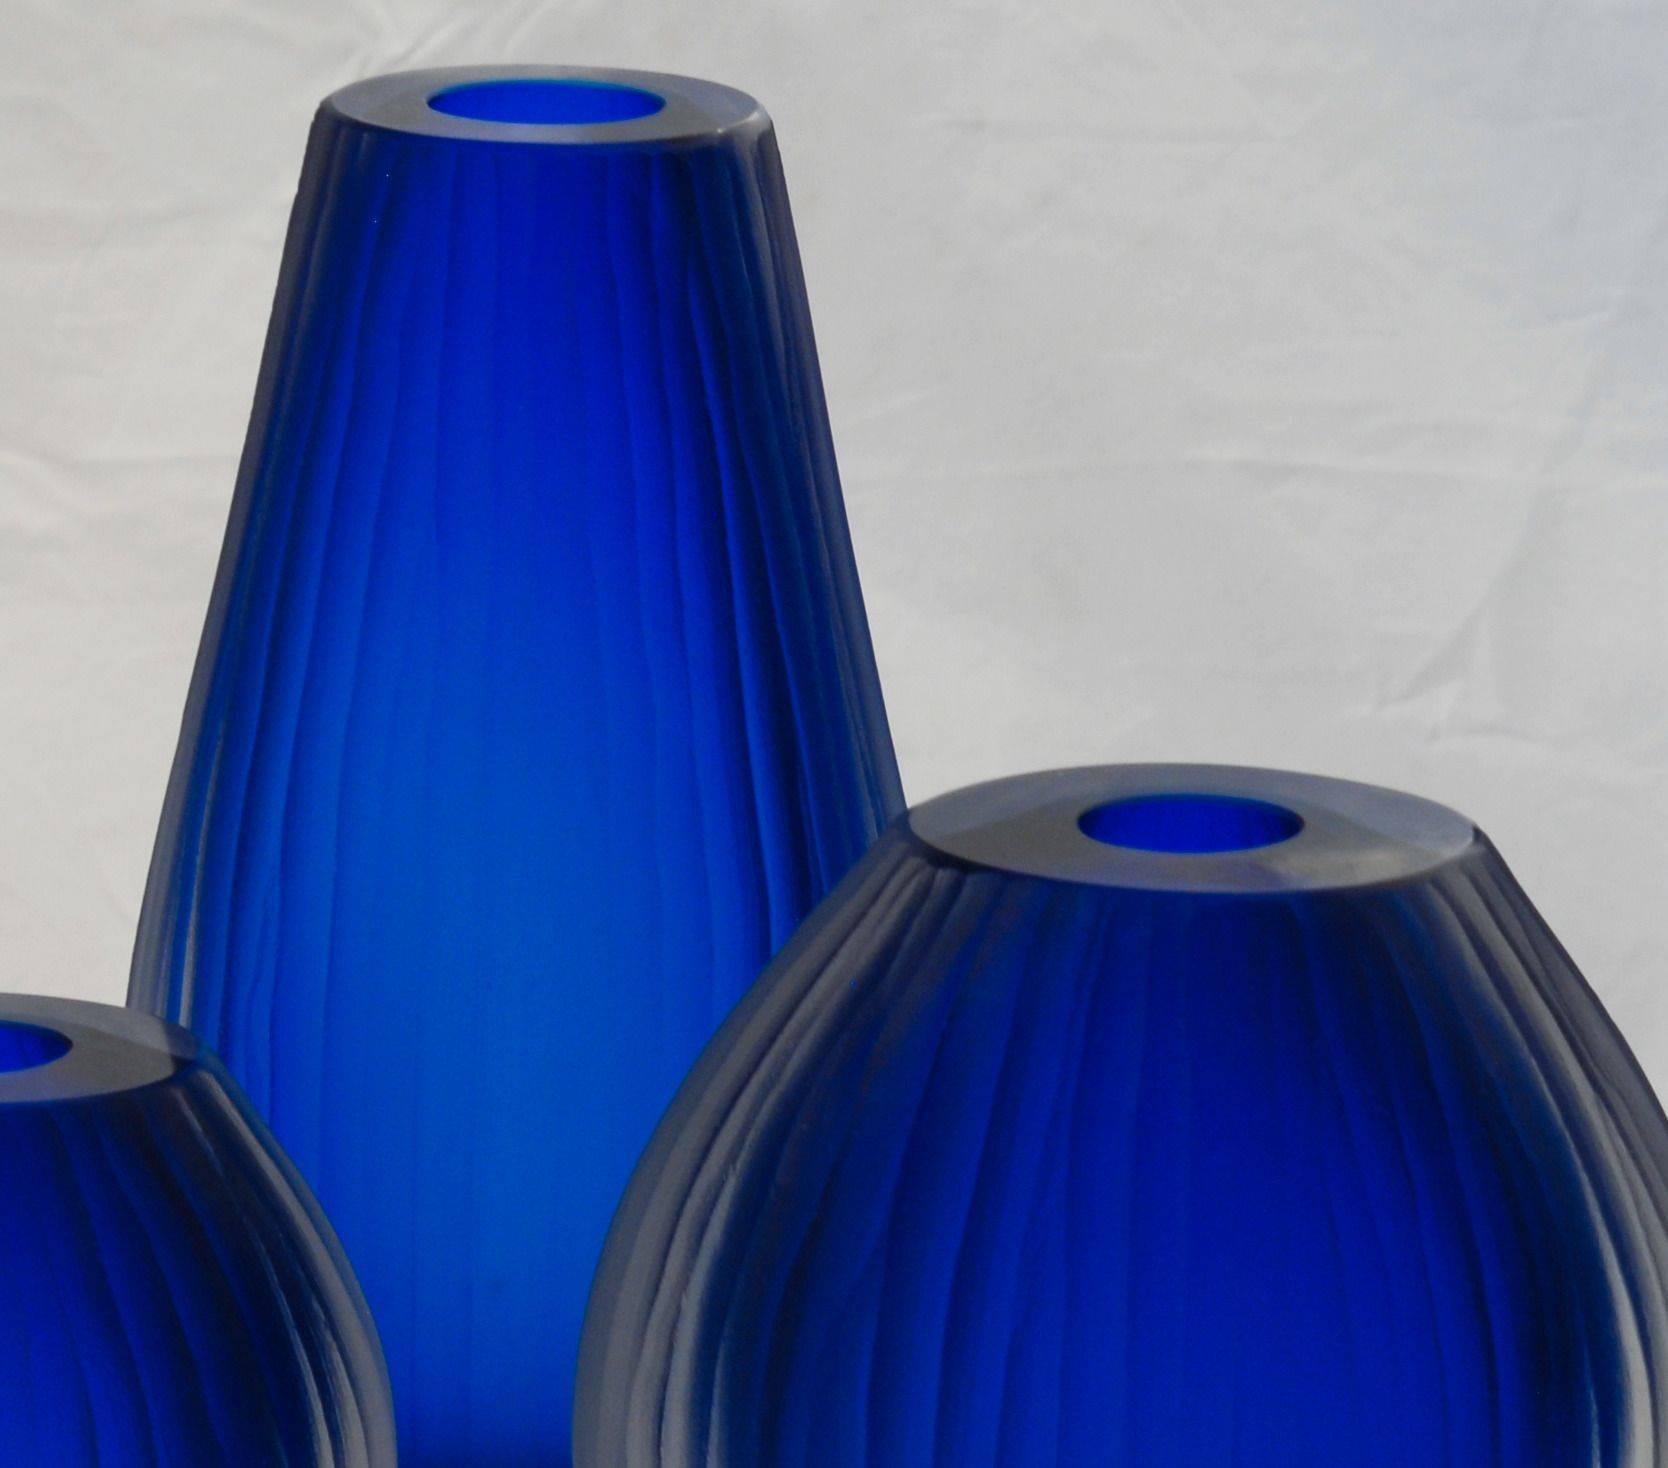 Here a beautiful cluster of three Sommerso vase. The inner color is a deep aquamarine, probably the color used for sbruffi, almost a cobalt blue. The outer glass is a massiccio clear. Each vase is completely finished in battuto.
The play of light